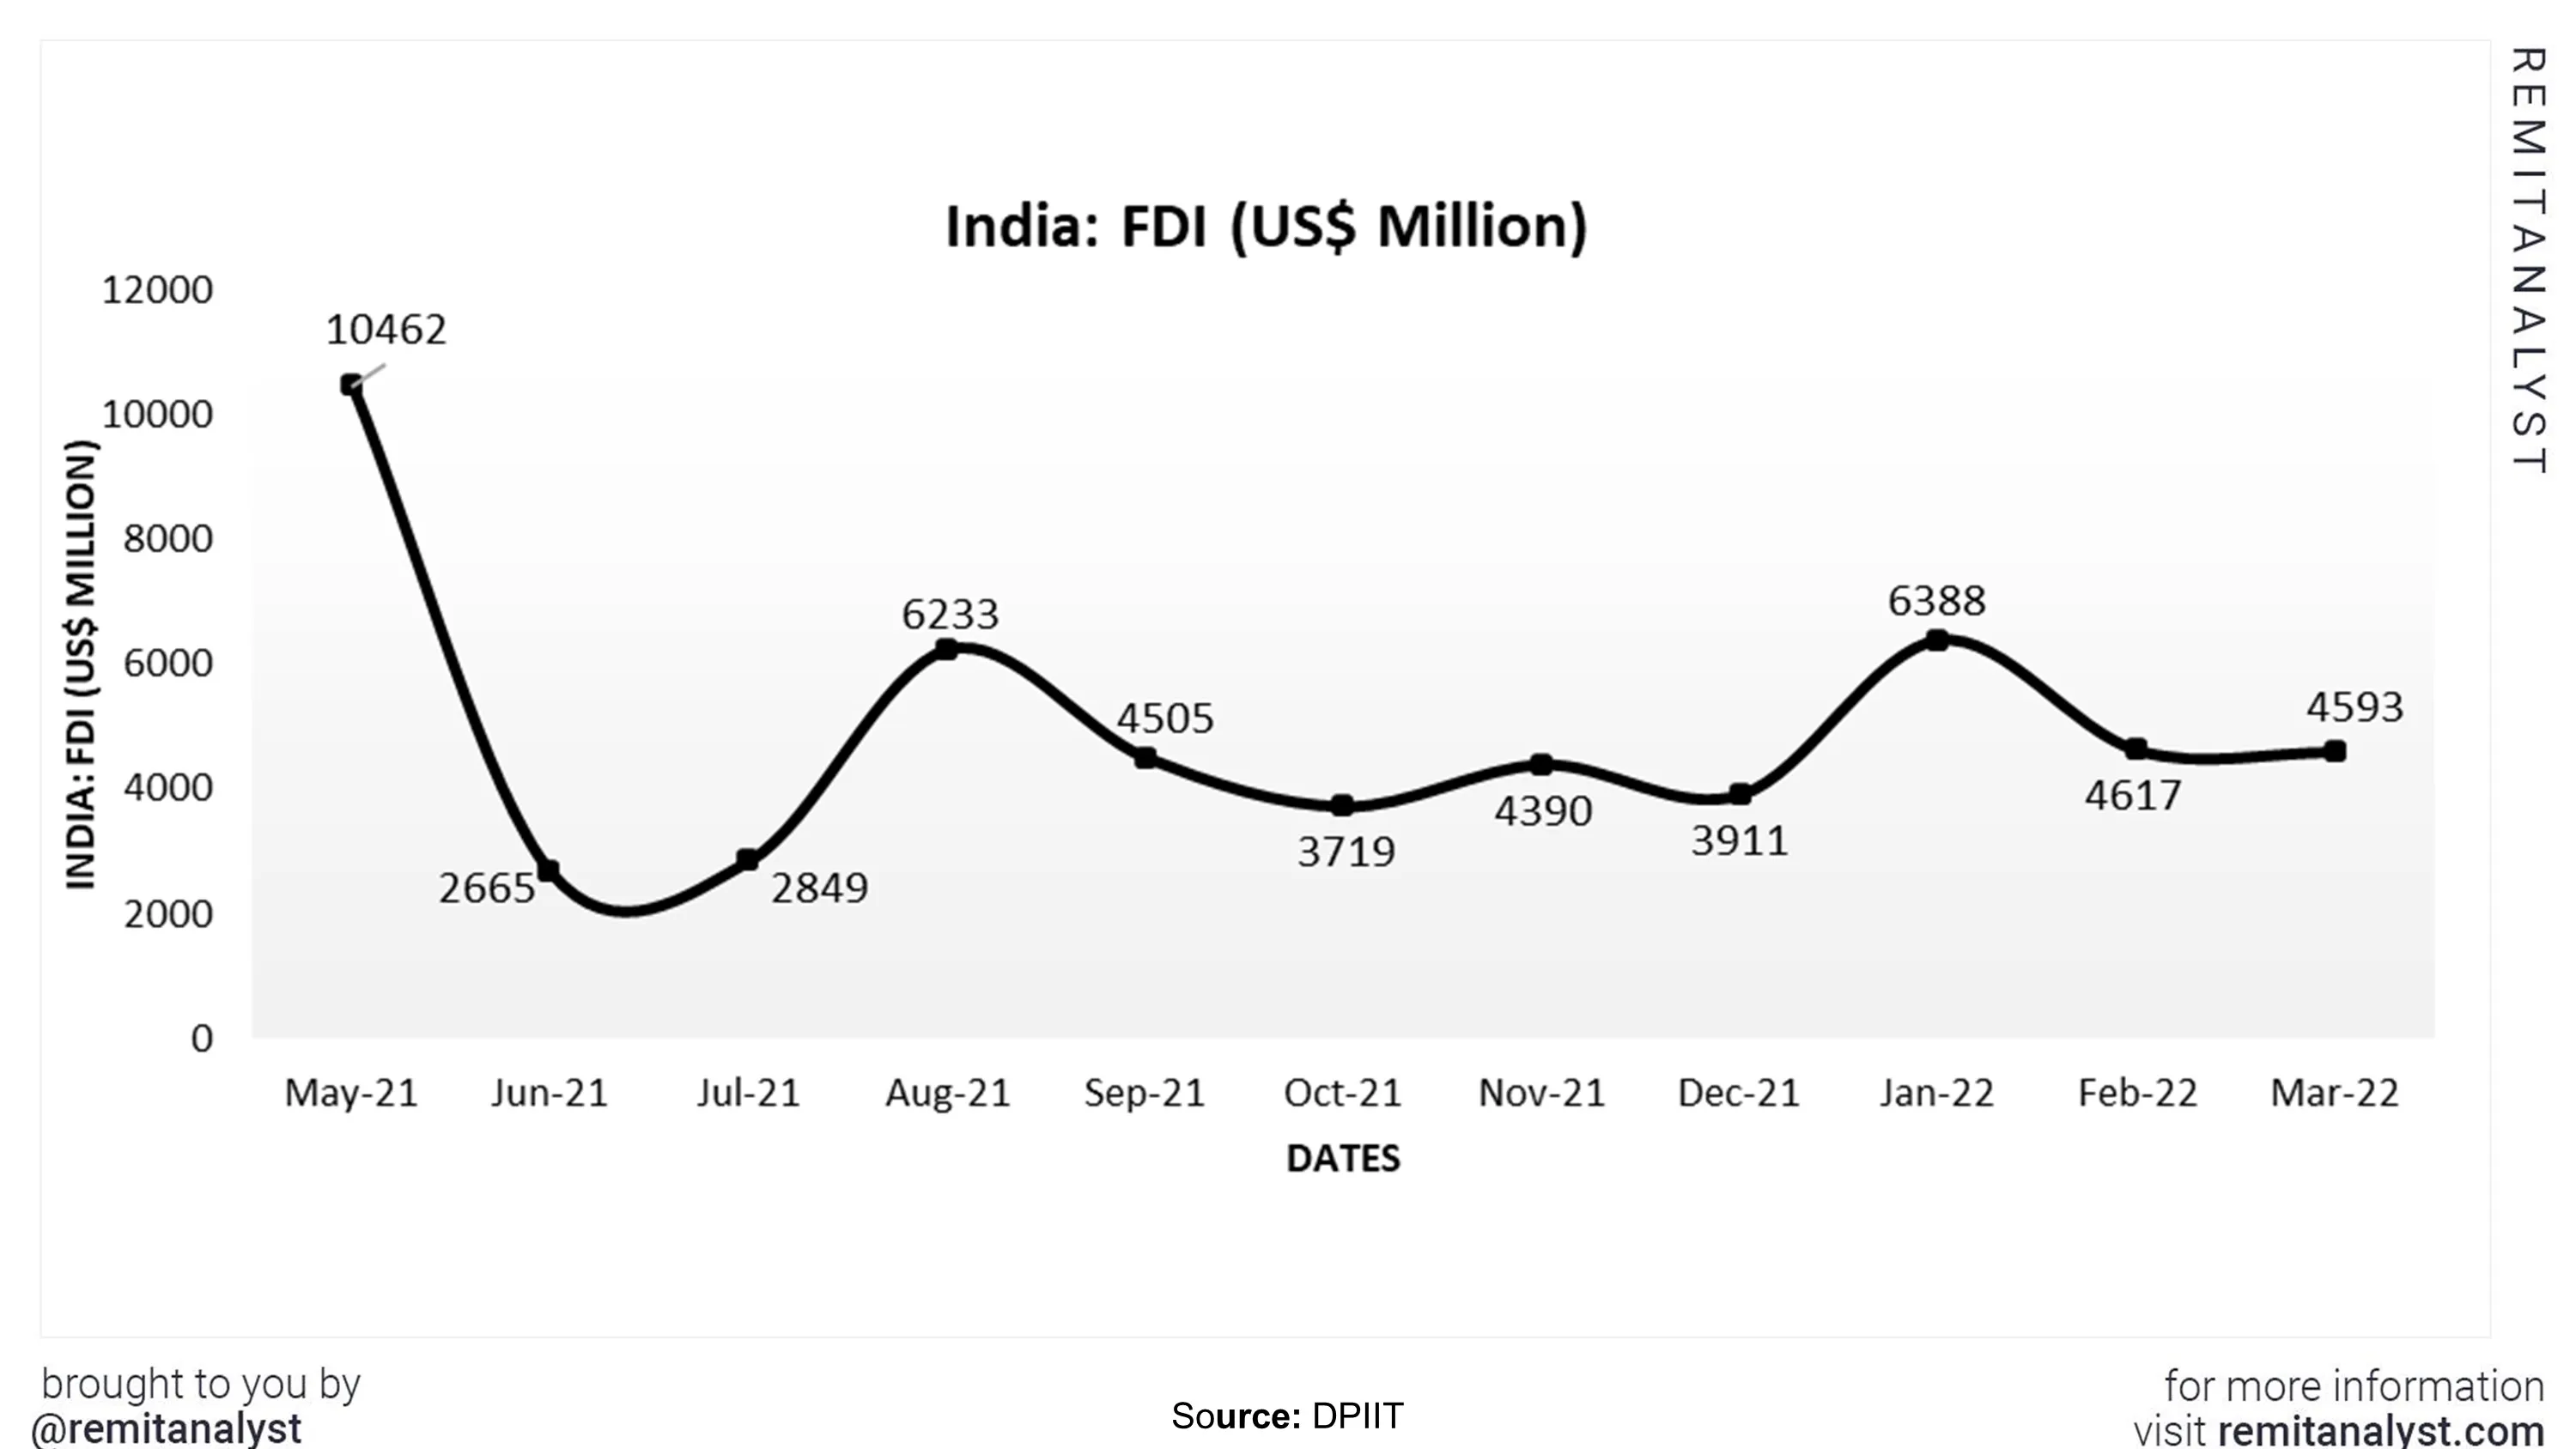 fdi-in-india-from-may-2021-to-mar-2022